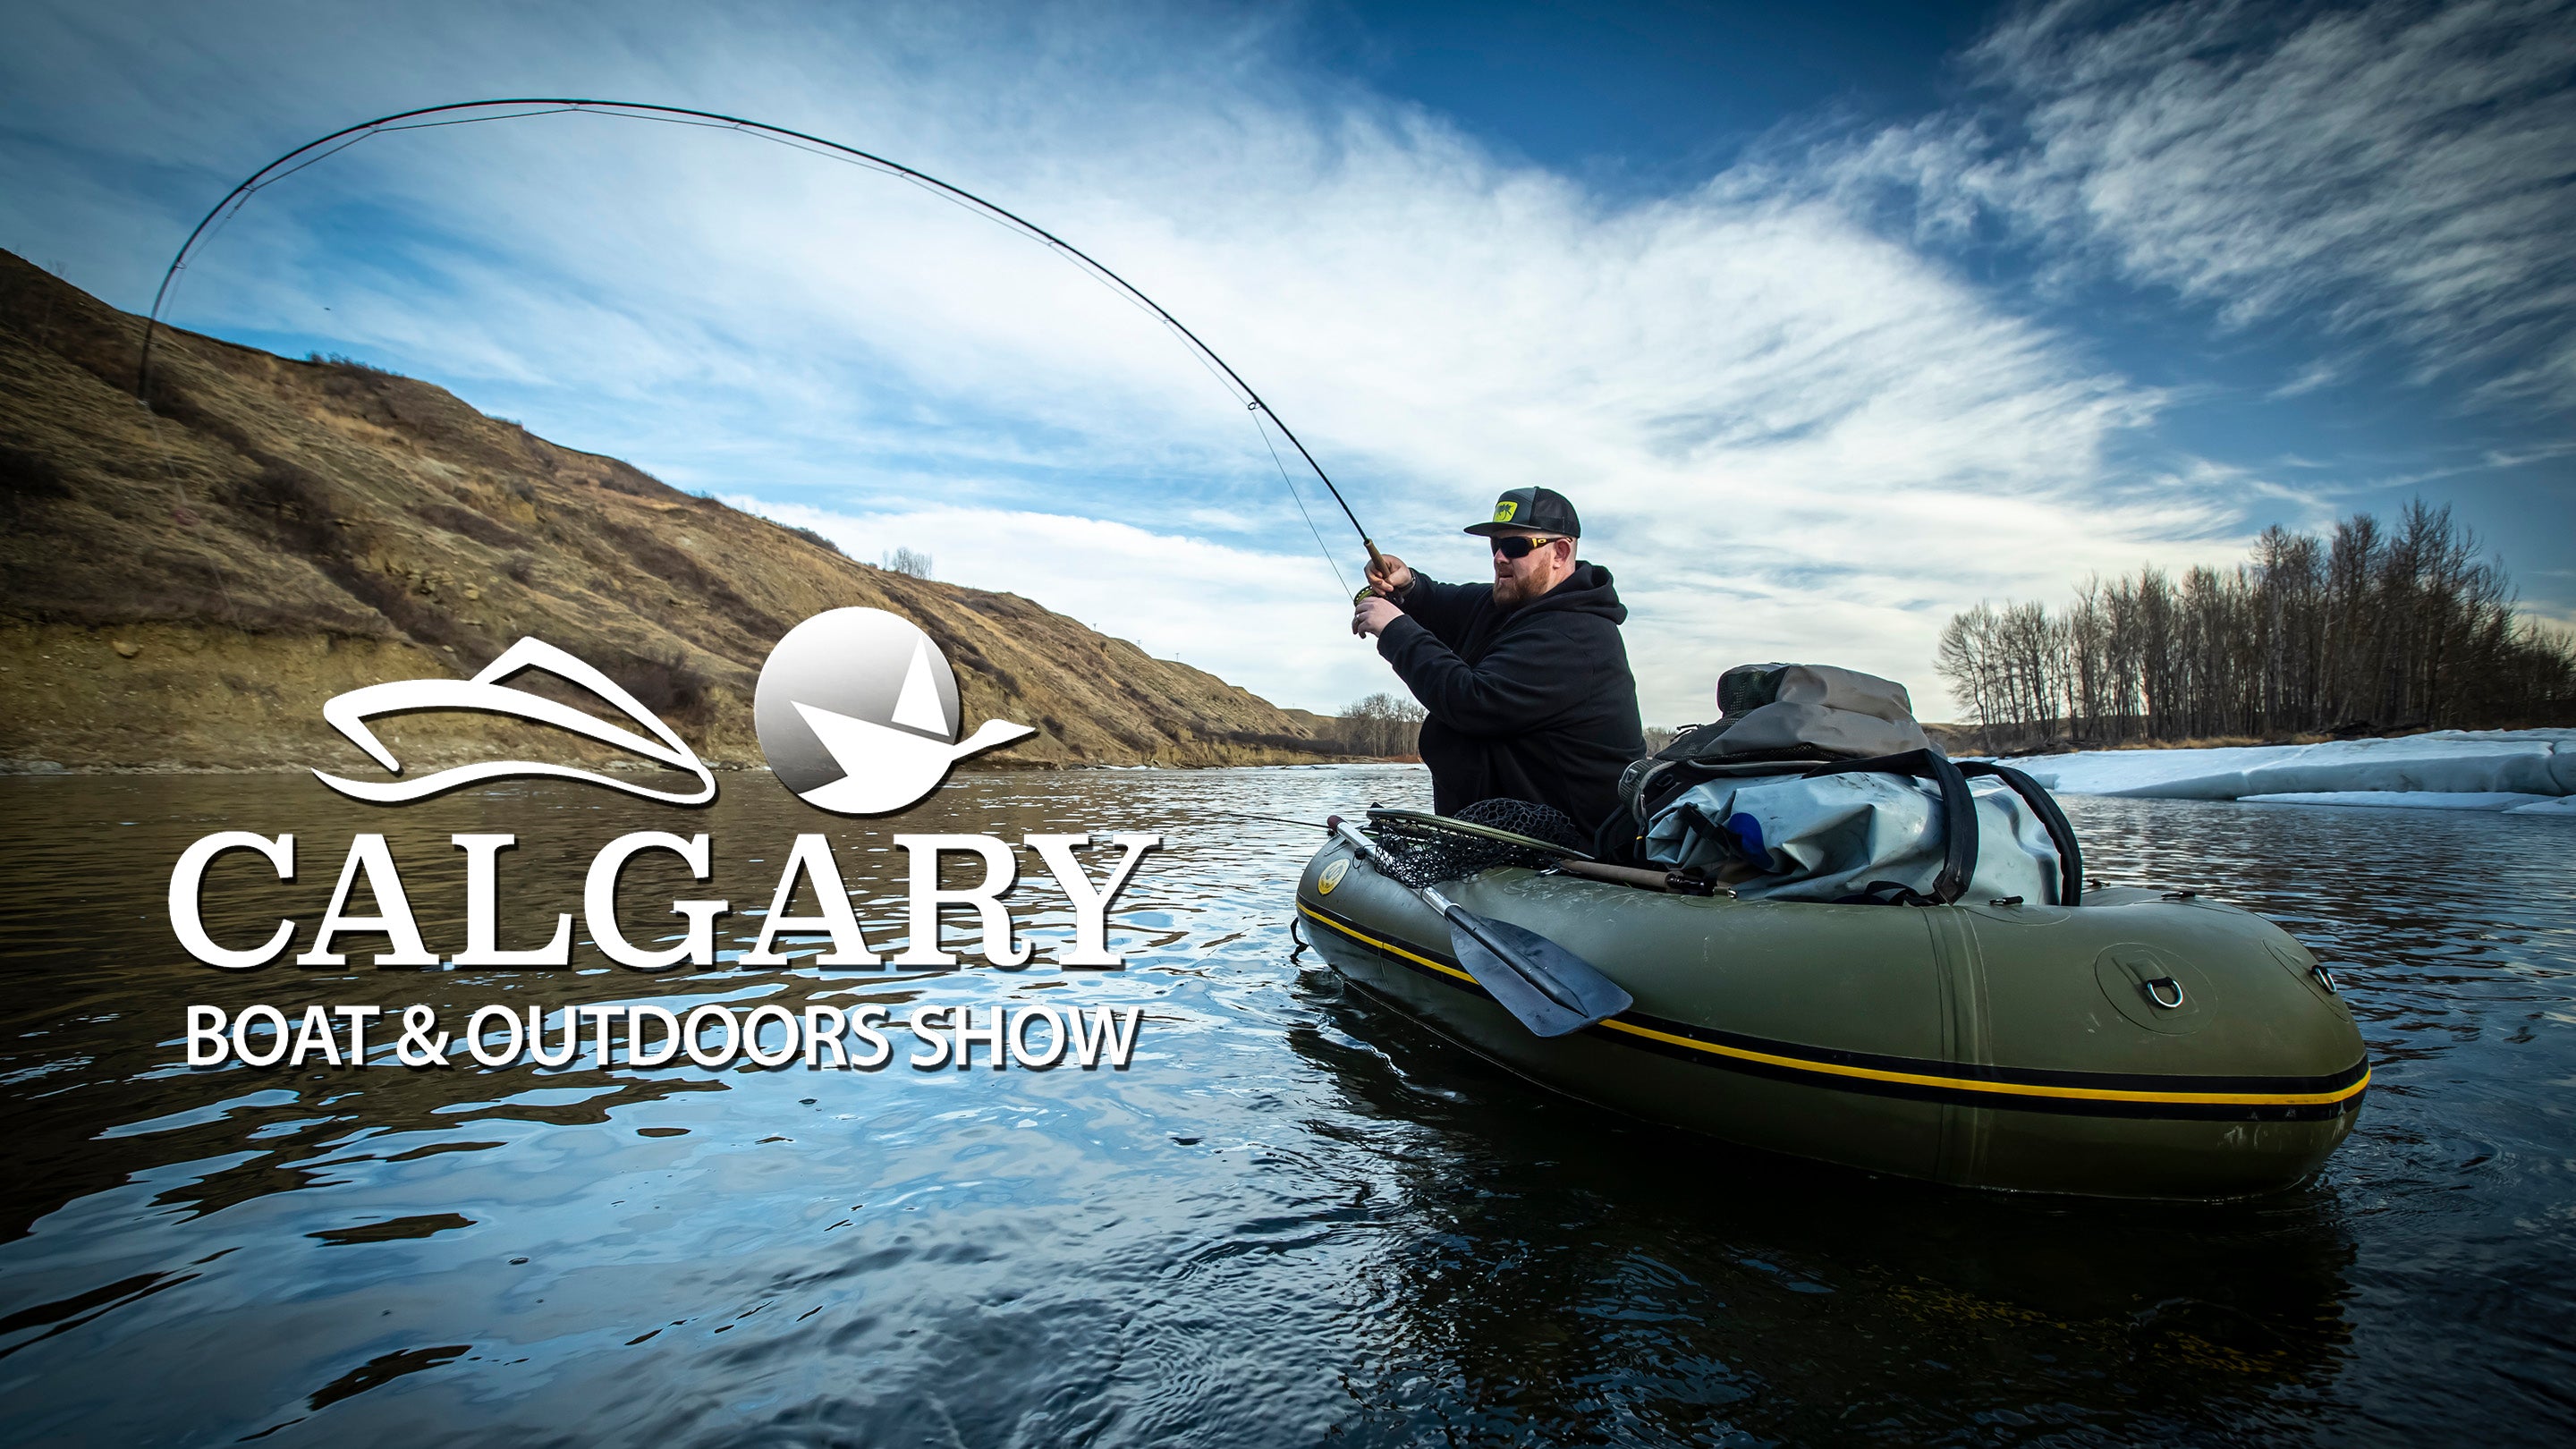 Calgary Boat and Outdoor Show Feb 10-12, 2023